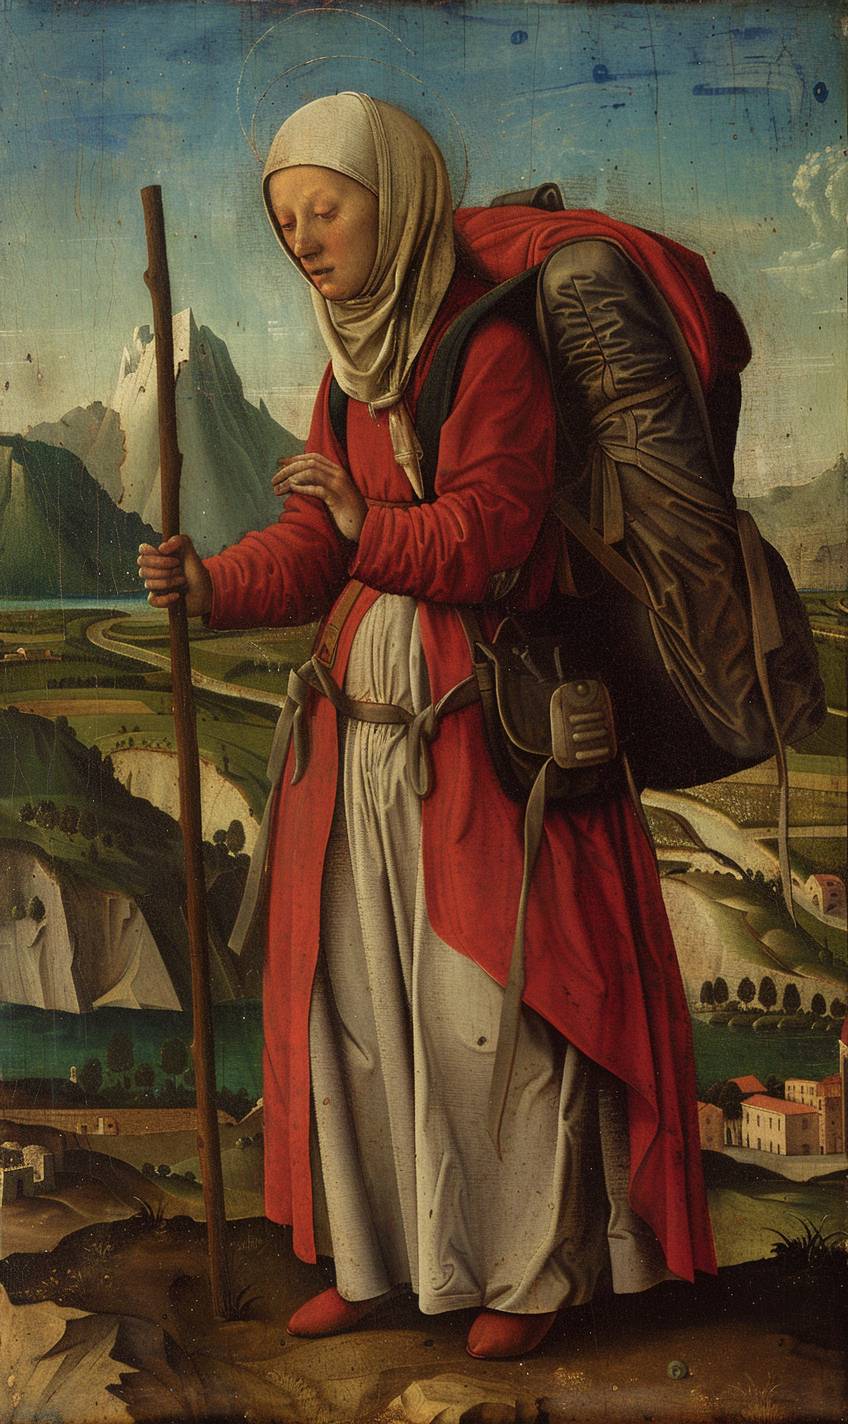 Painting by Antonello da Messina depicting a lady backpacker traveler